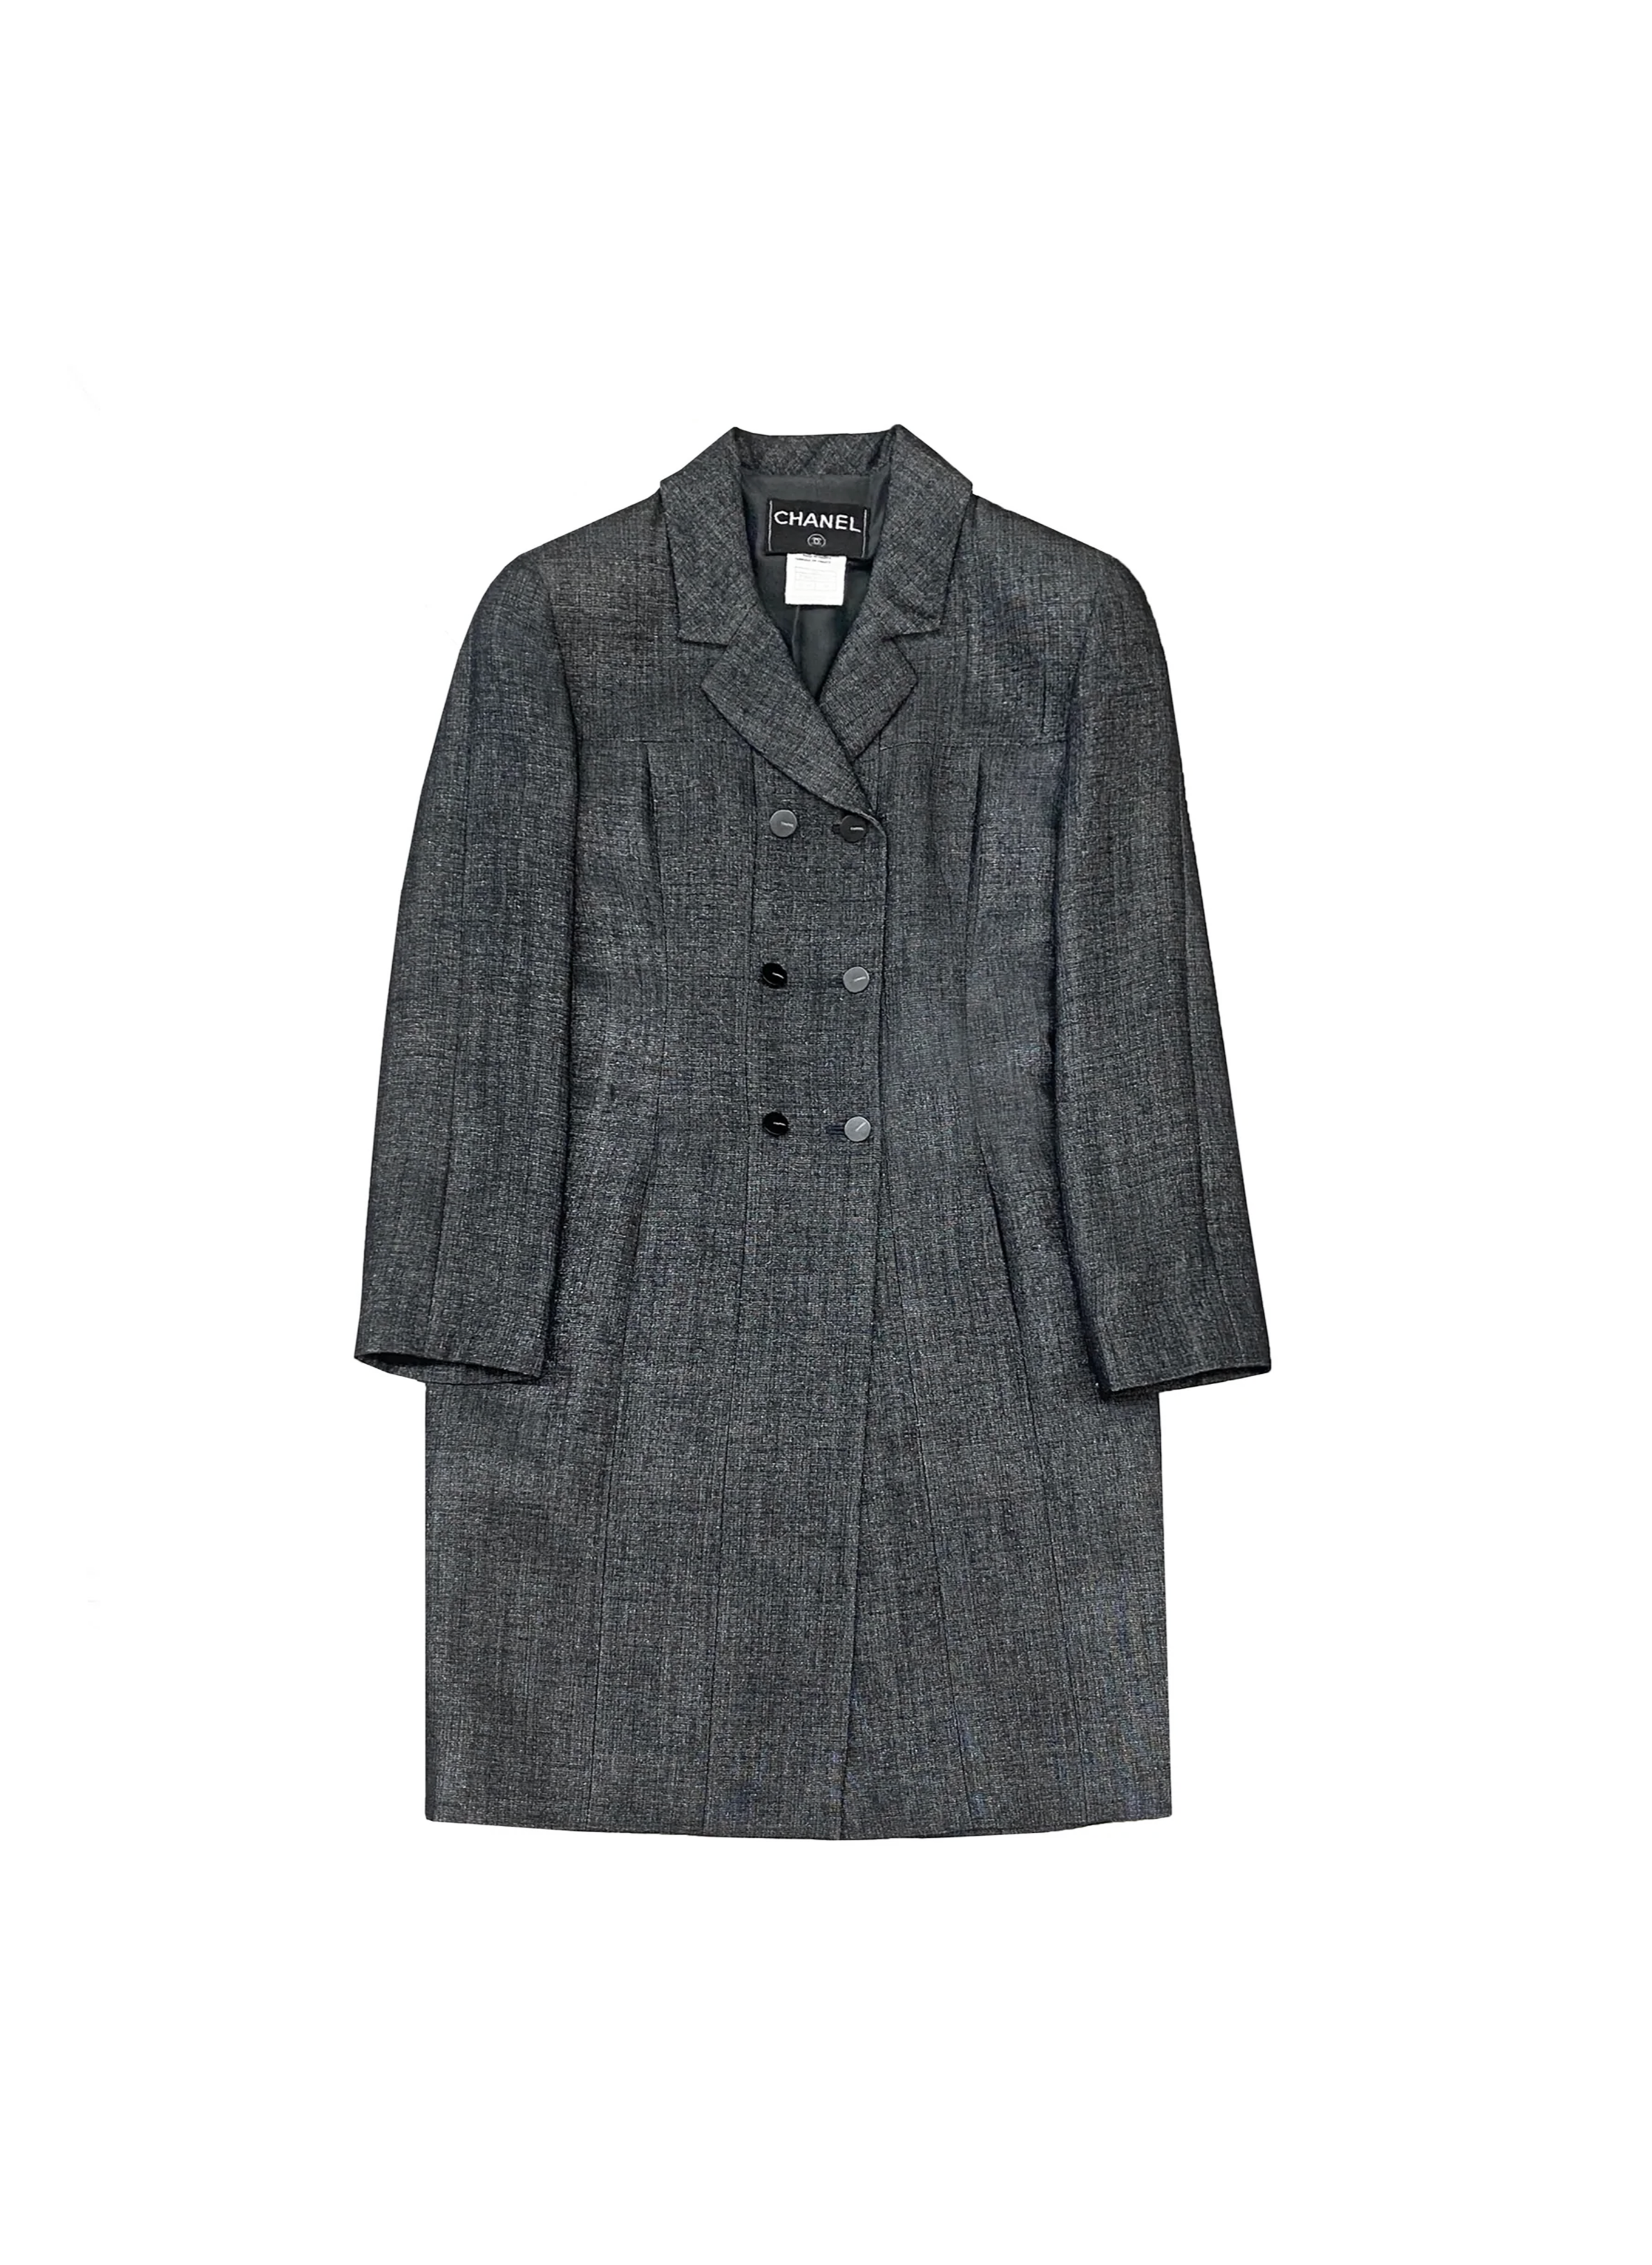 Chanel 1999 Double Breasted Wool Coat Dress